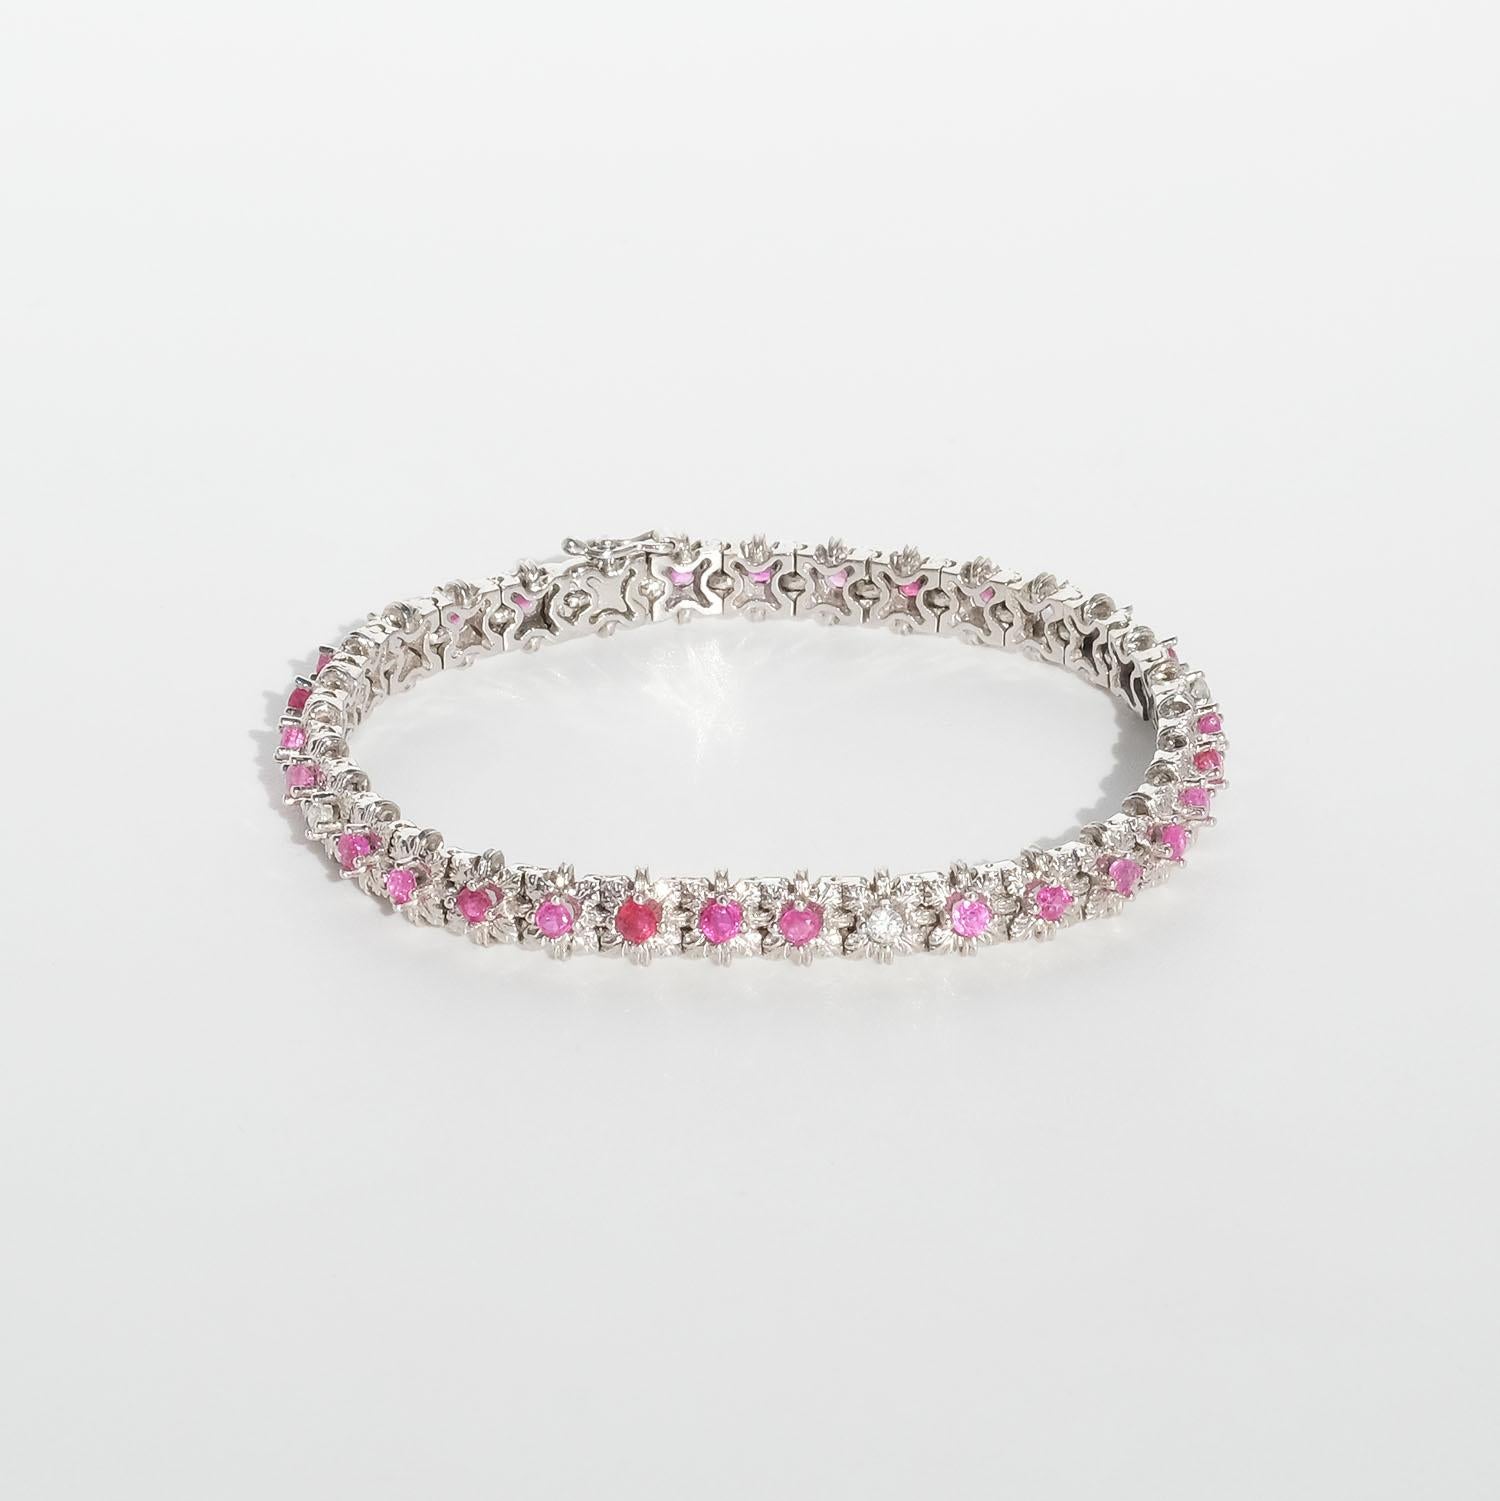 This 18 karat white gold bracelet is adorned with pink and white sapphires which are surrounded by flower settings. The bracelet closes easily with a box clasp and it has a safety catch.

The handcraft of this bracelet is amazing. It may be